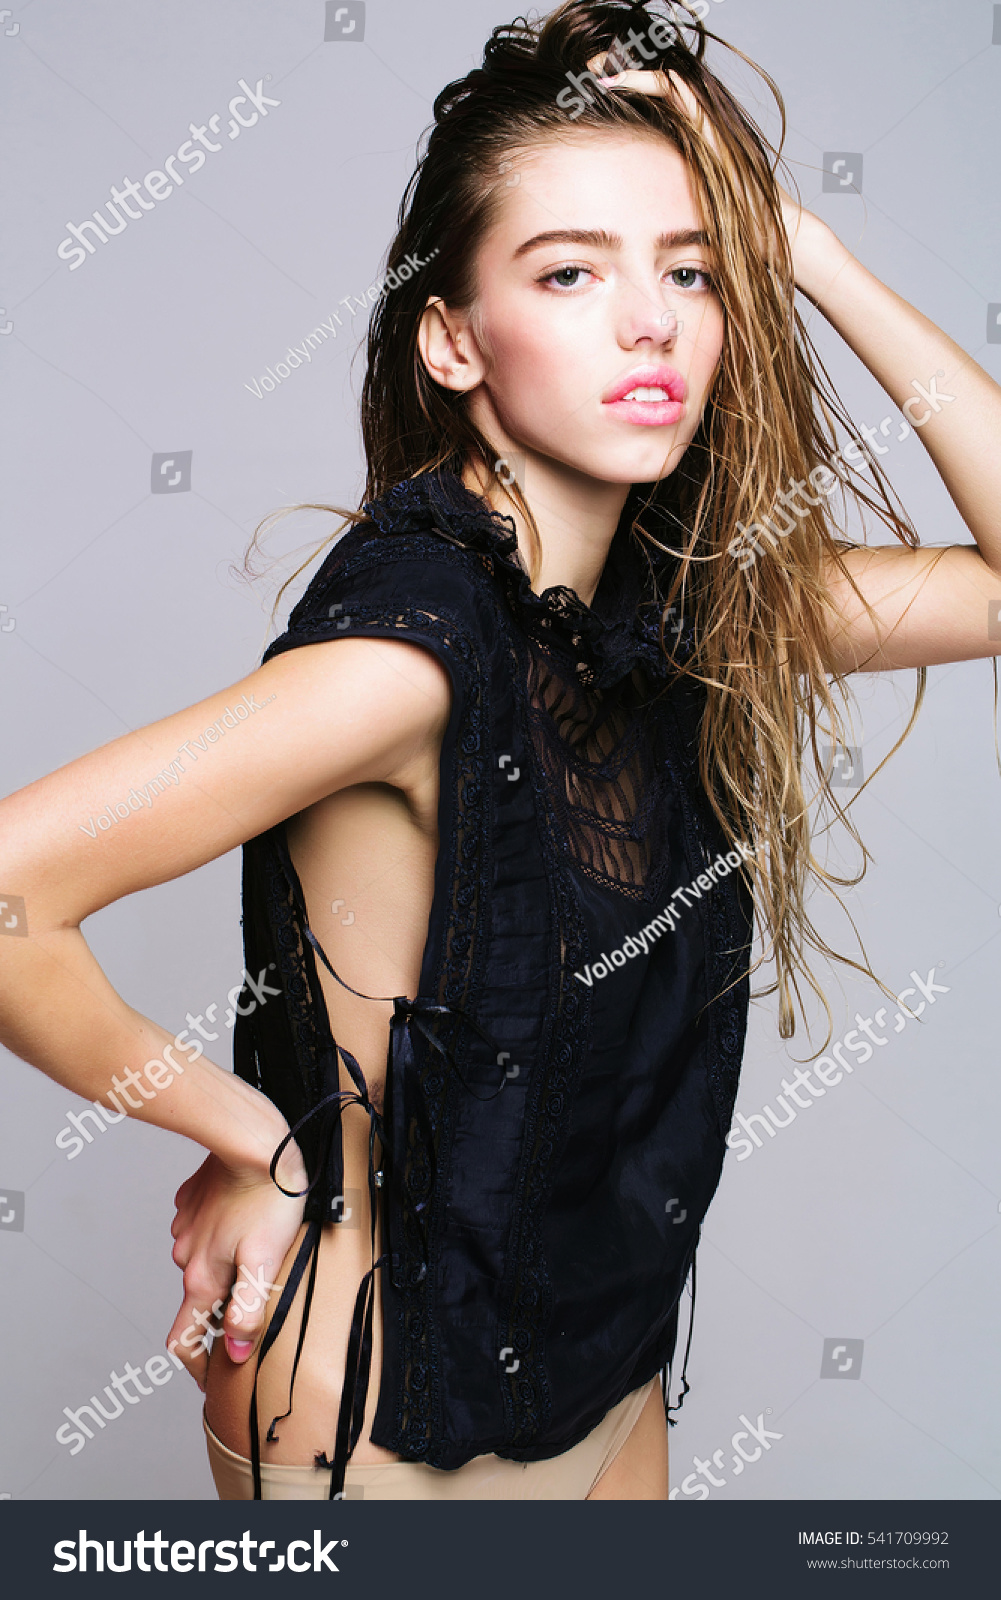 Young Pretty Woman Cute Sexy Girl Stock Photo 541709992 ...